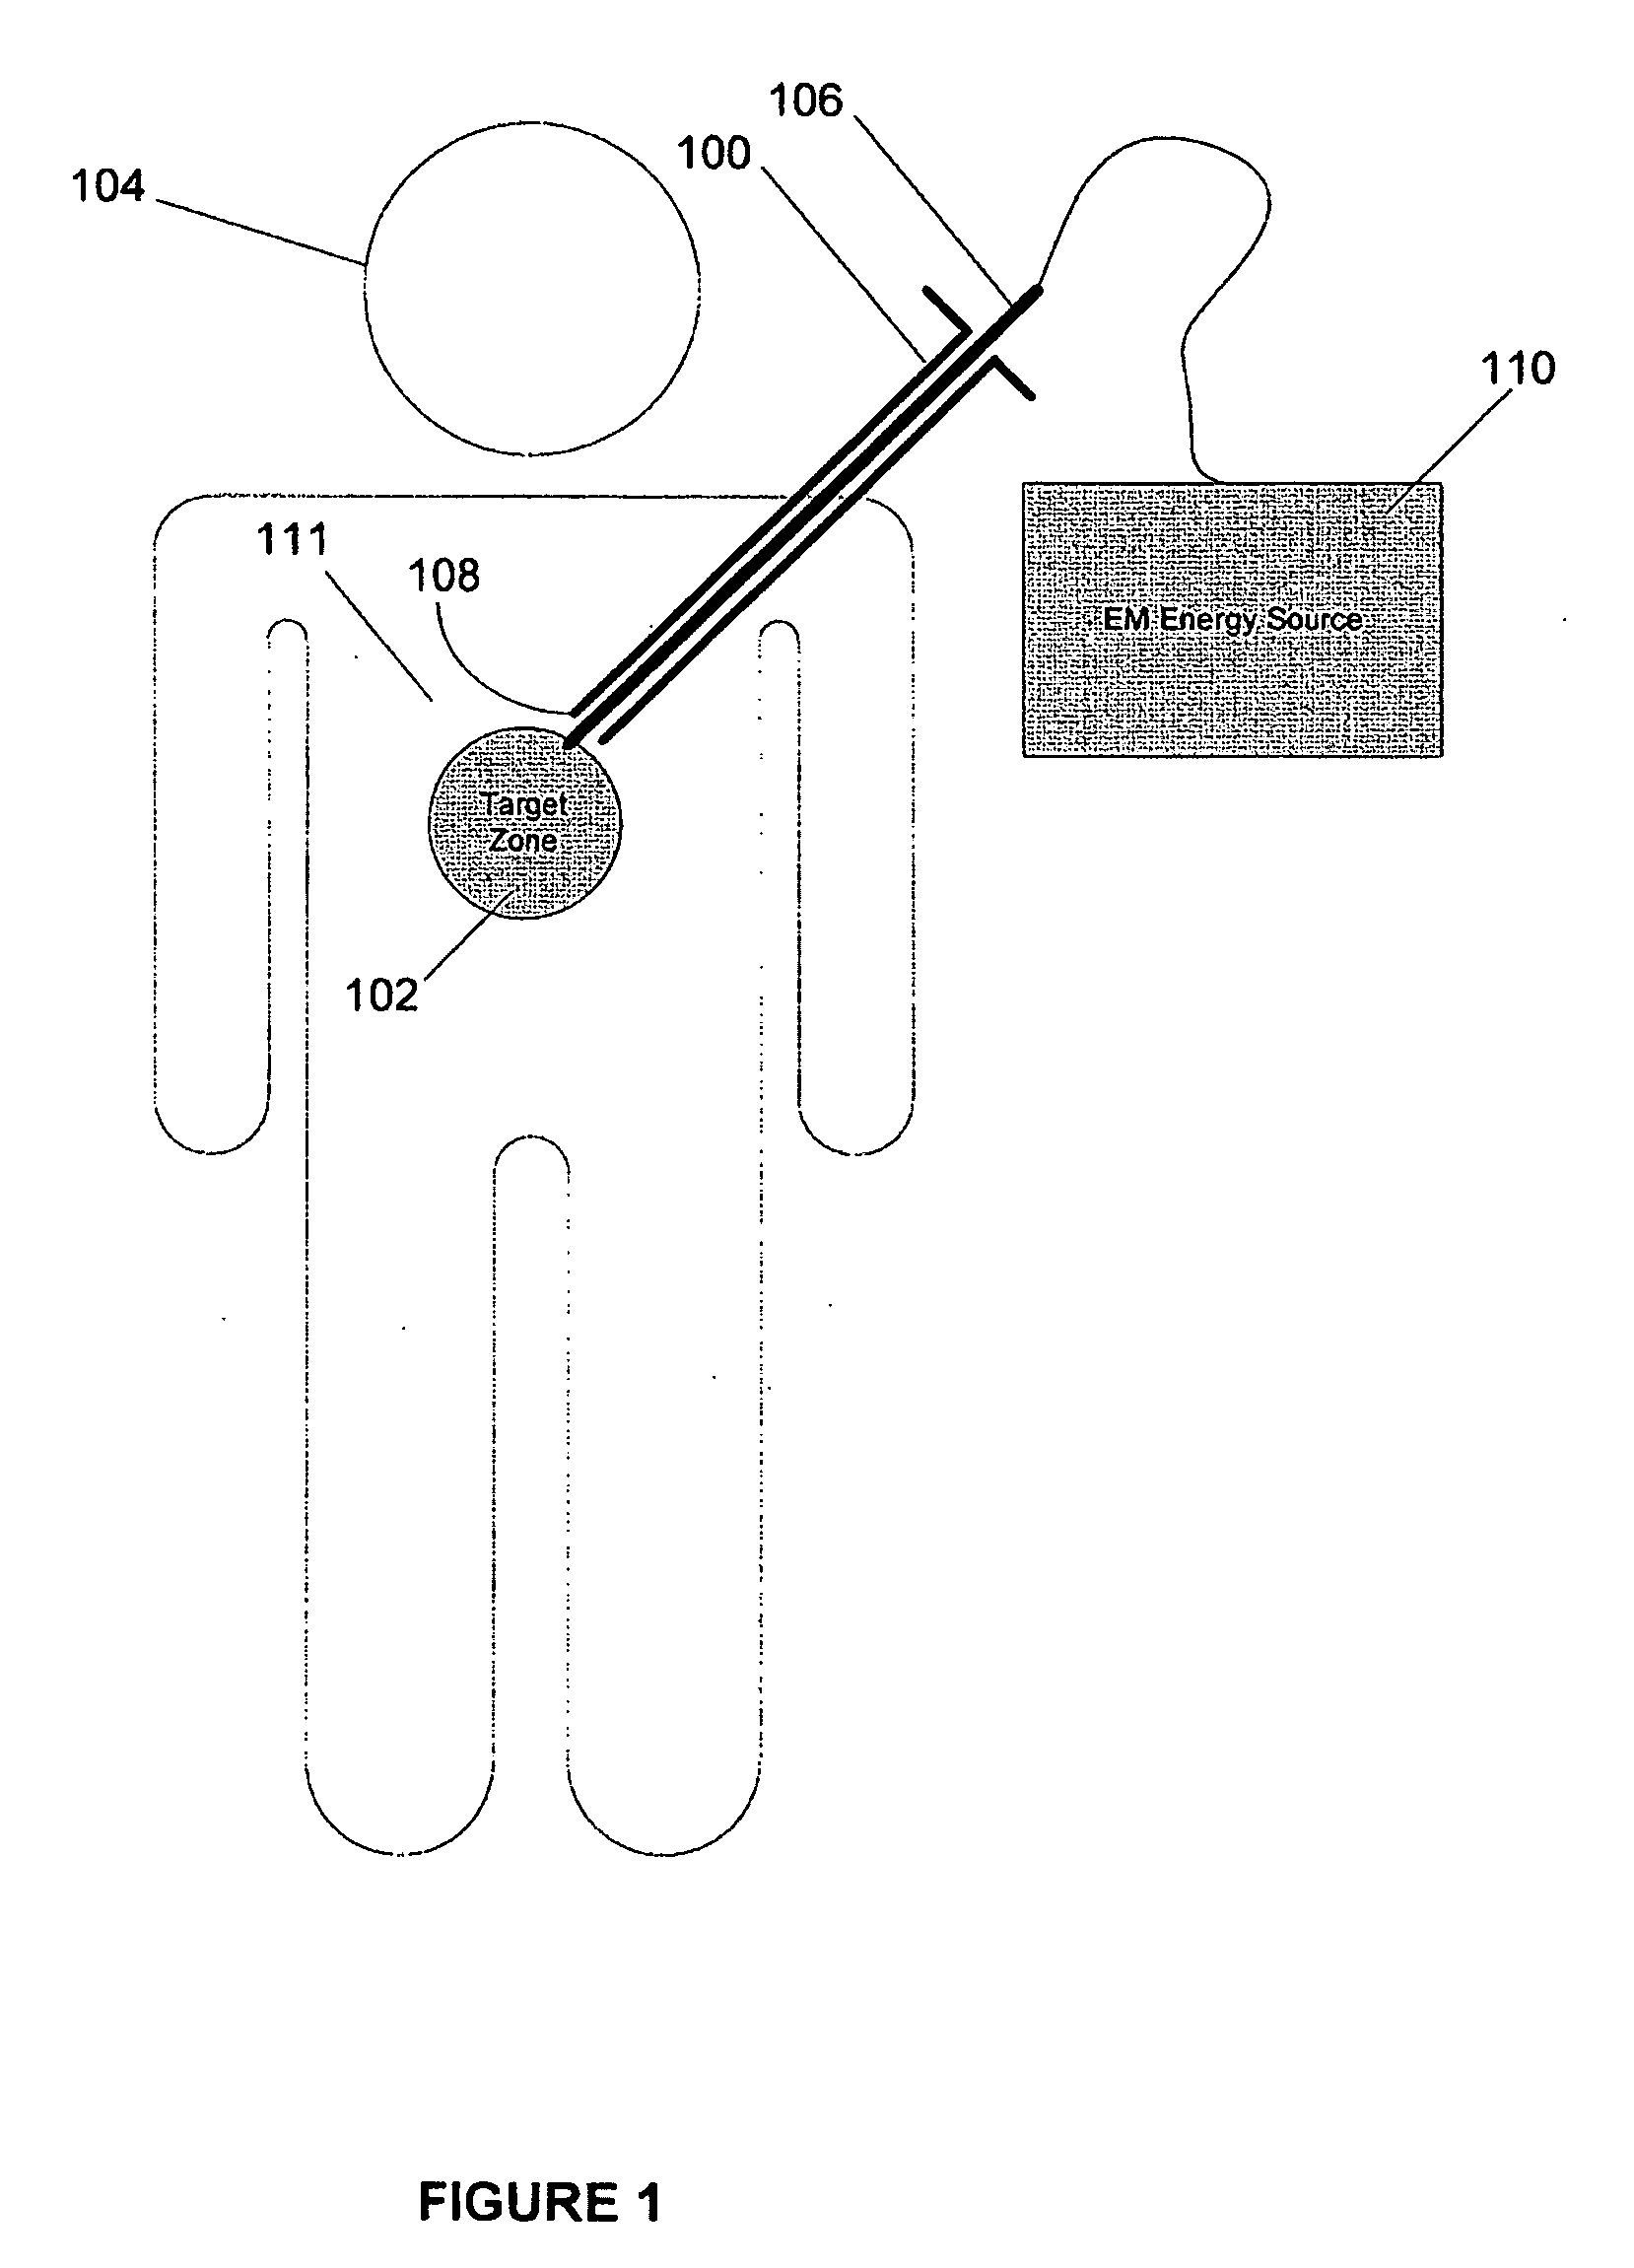 Heating via microwave and millimeter-wave transmission using a hypodermic needle